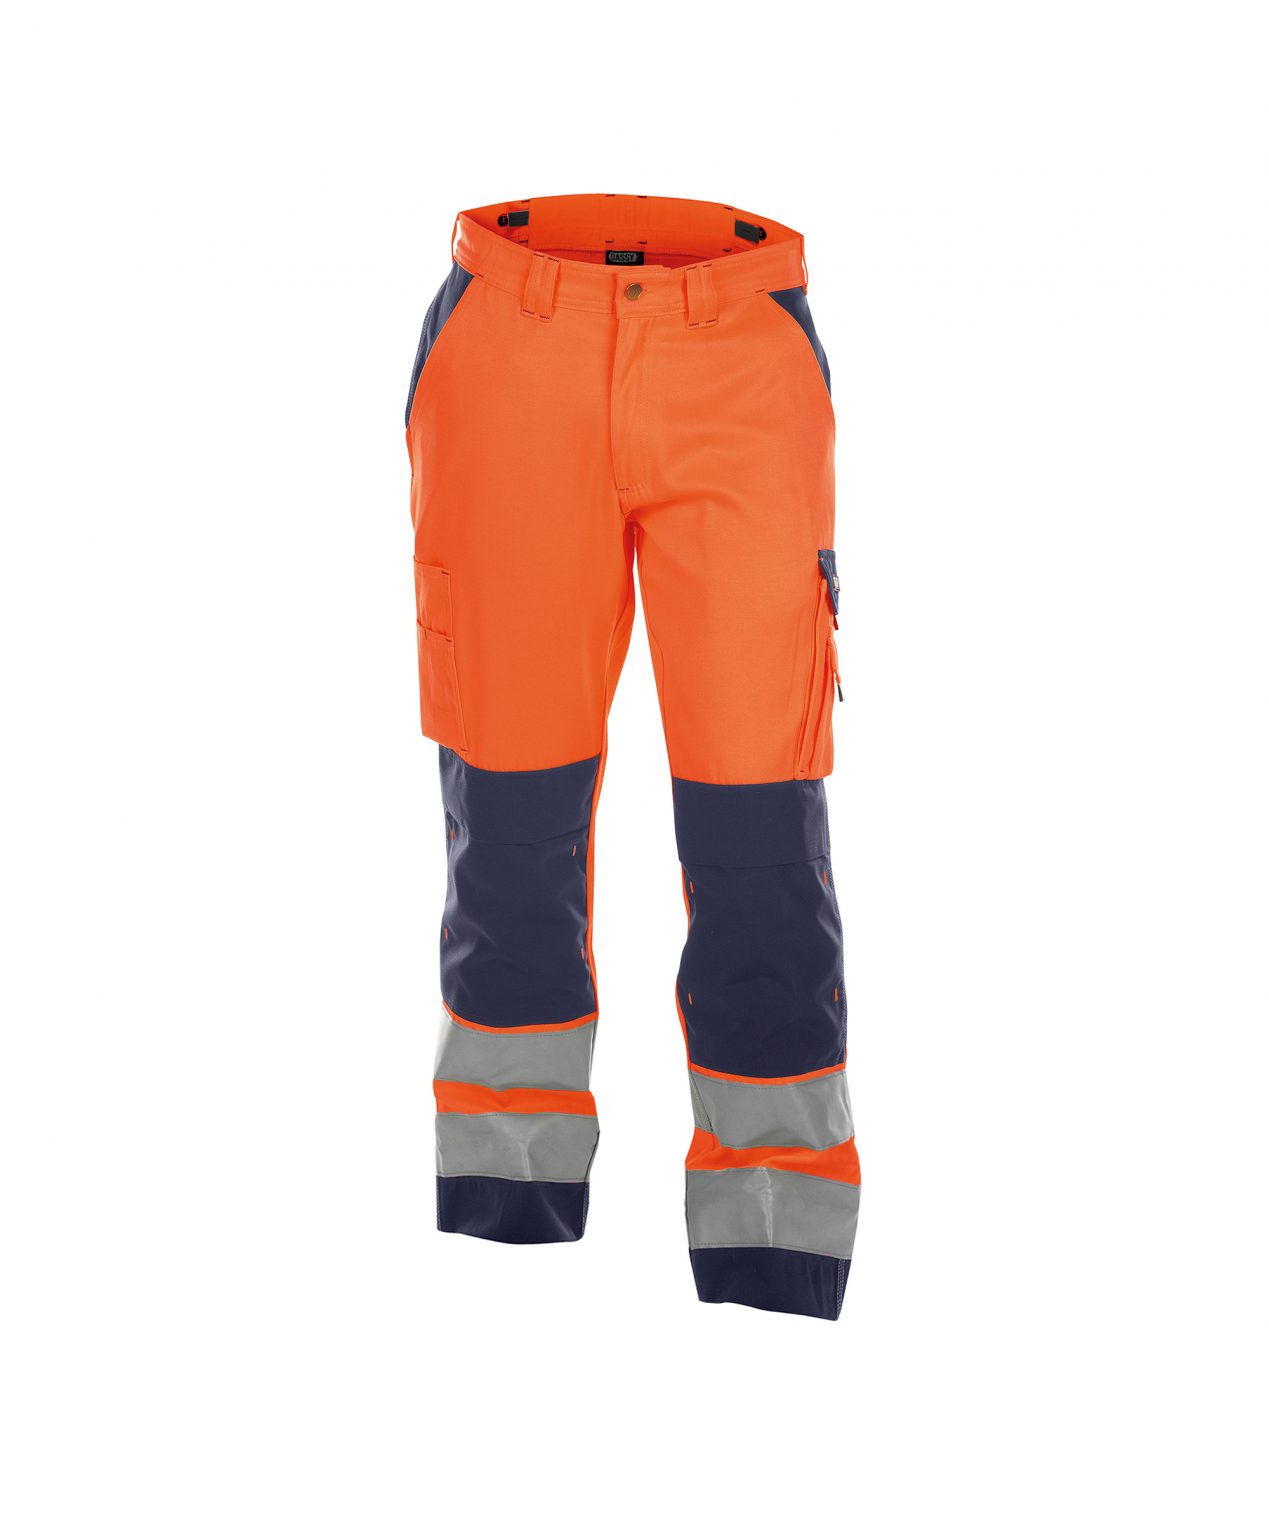 buffalo high visibility work trousers with knee pockets fluo orange navy front